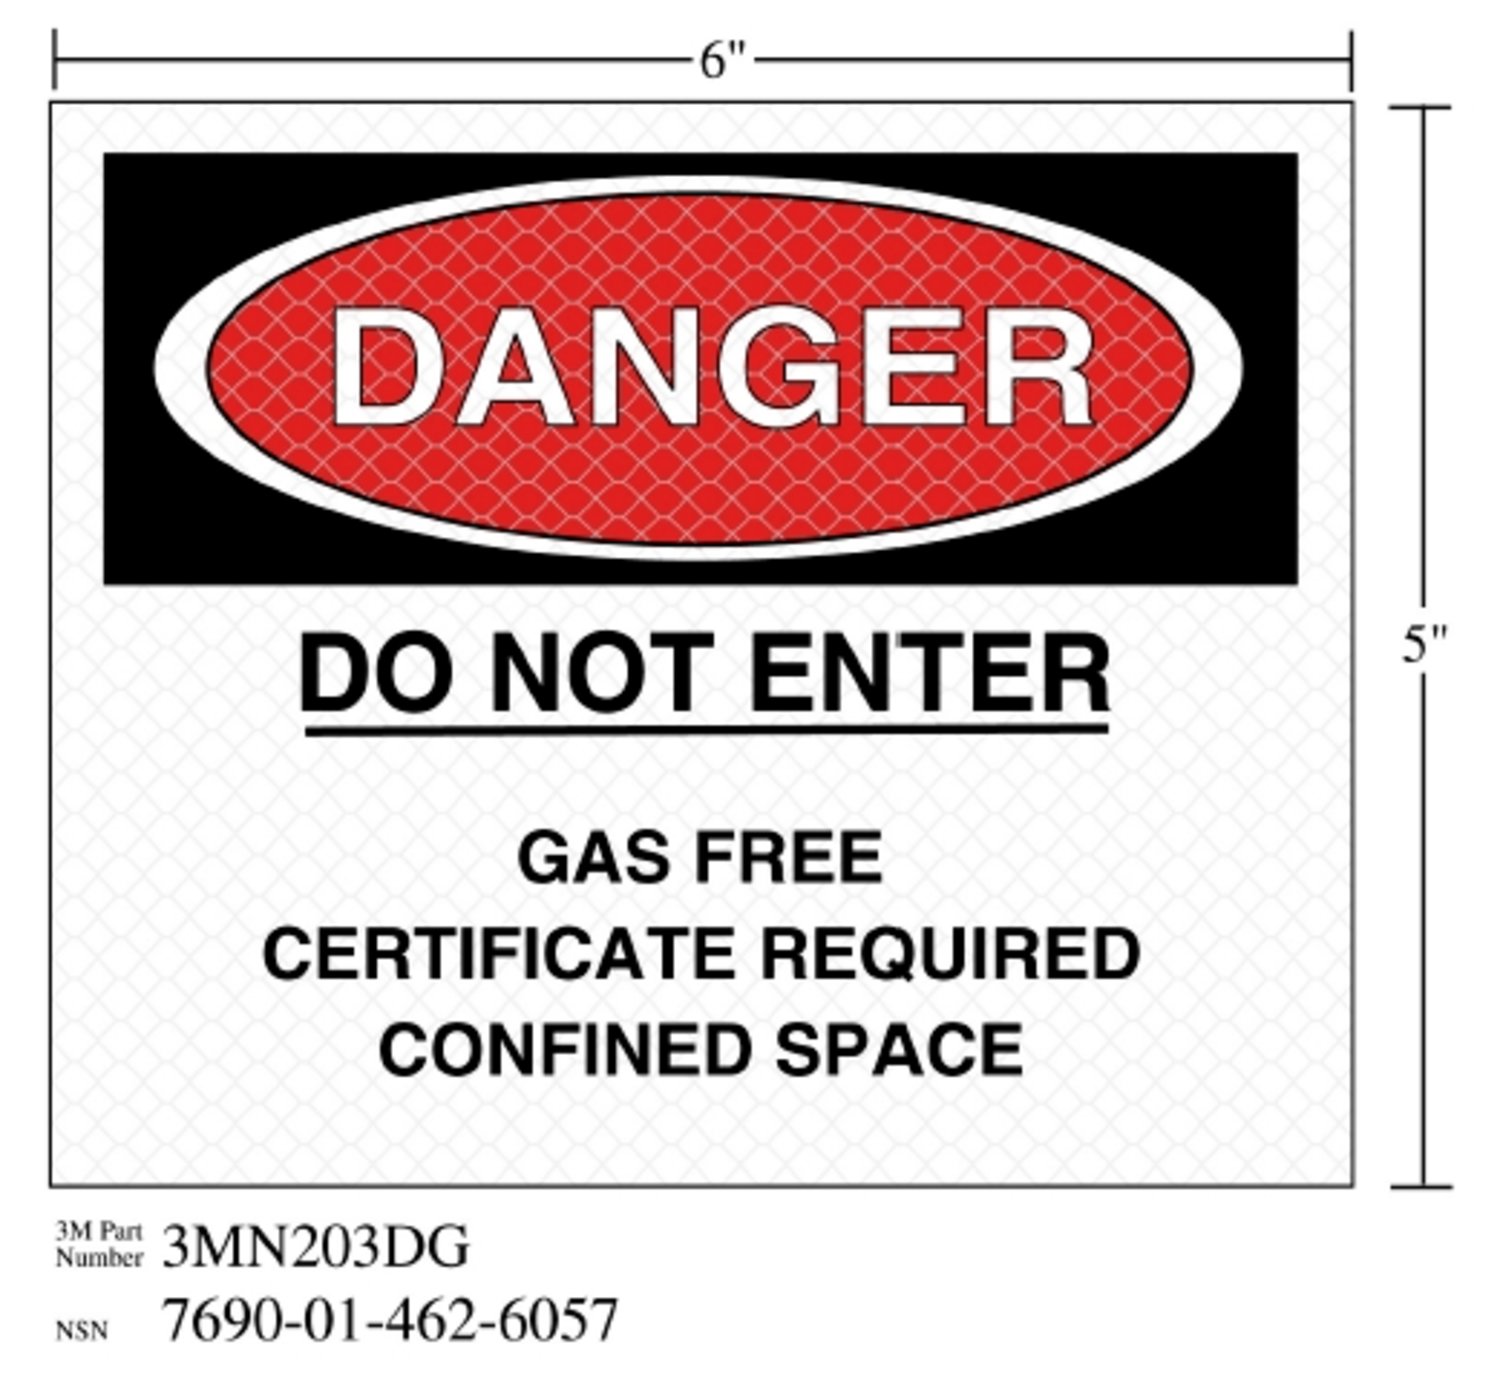 7010317784 - 3M Diamond Grade Safety Sign 3MN203DG, "DANGER…SPACE", 6 in x 5 in,
10/Package